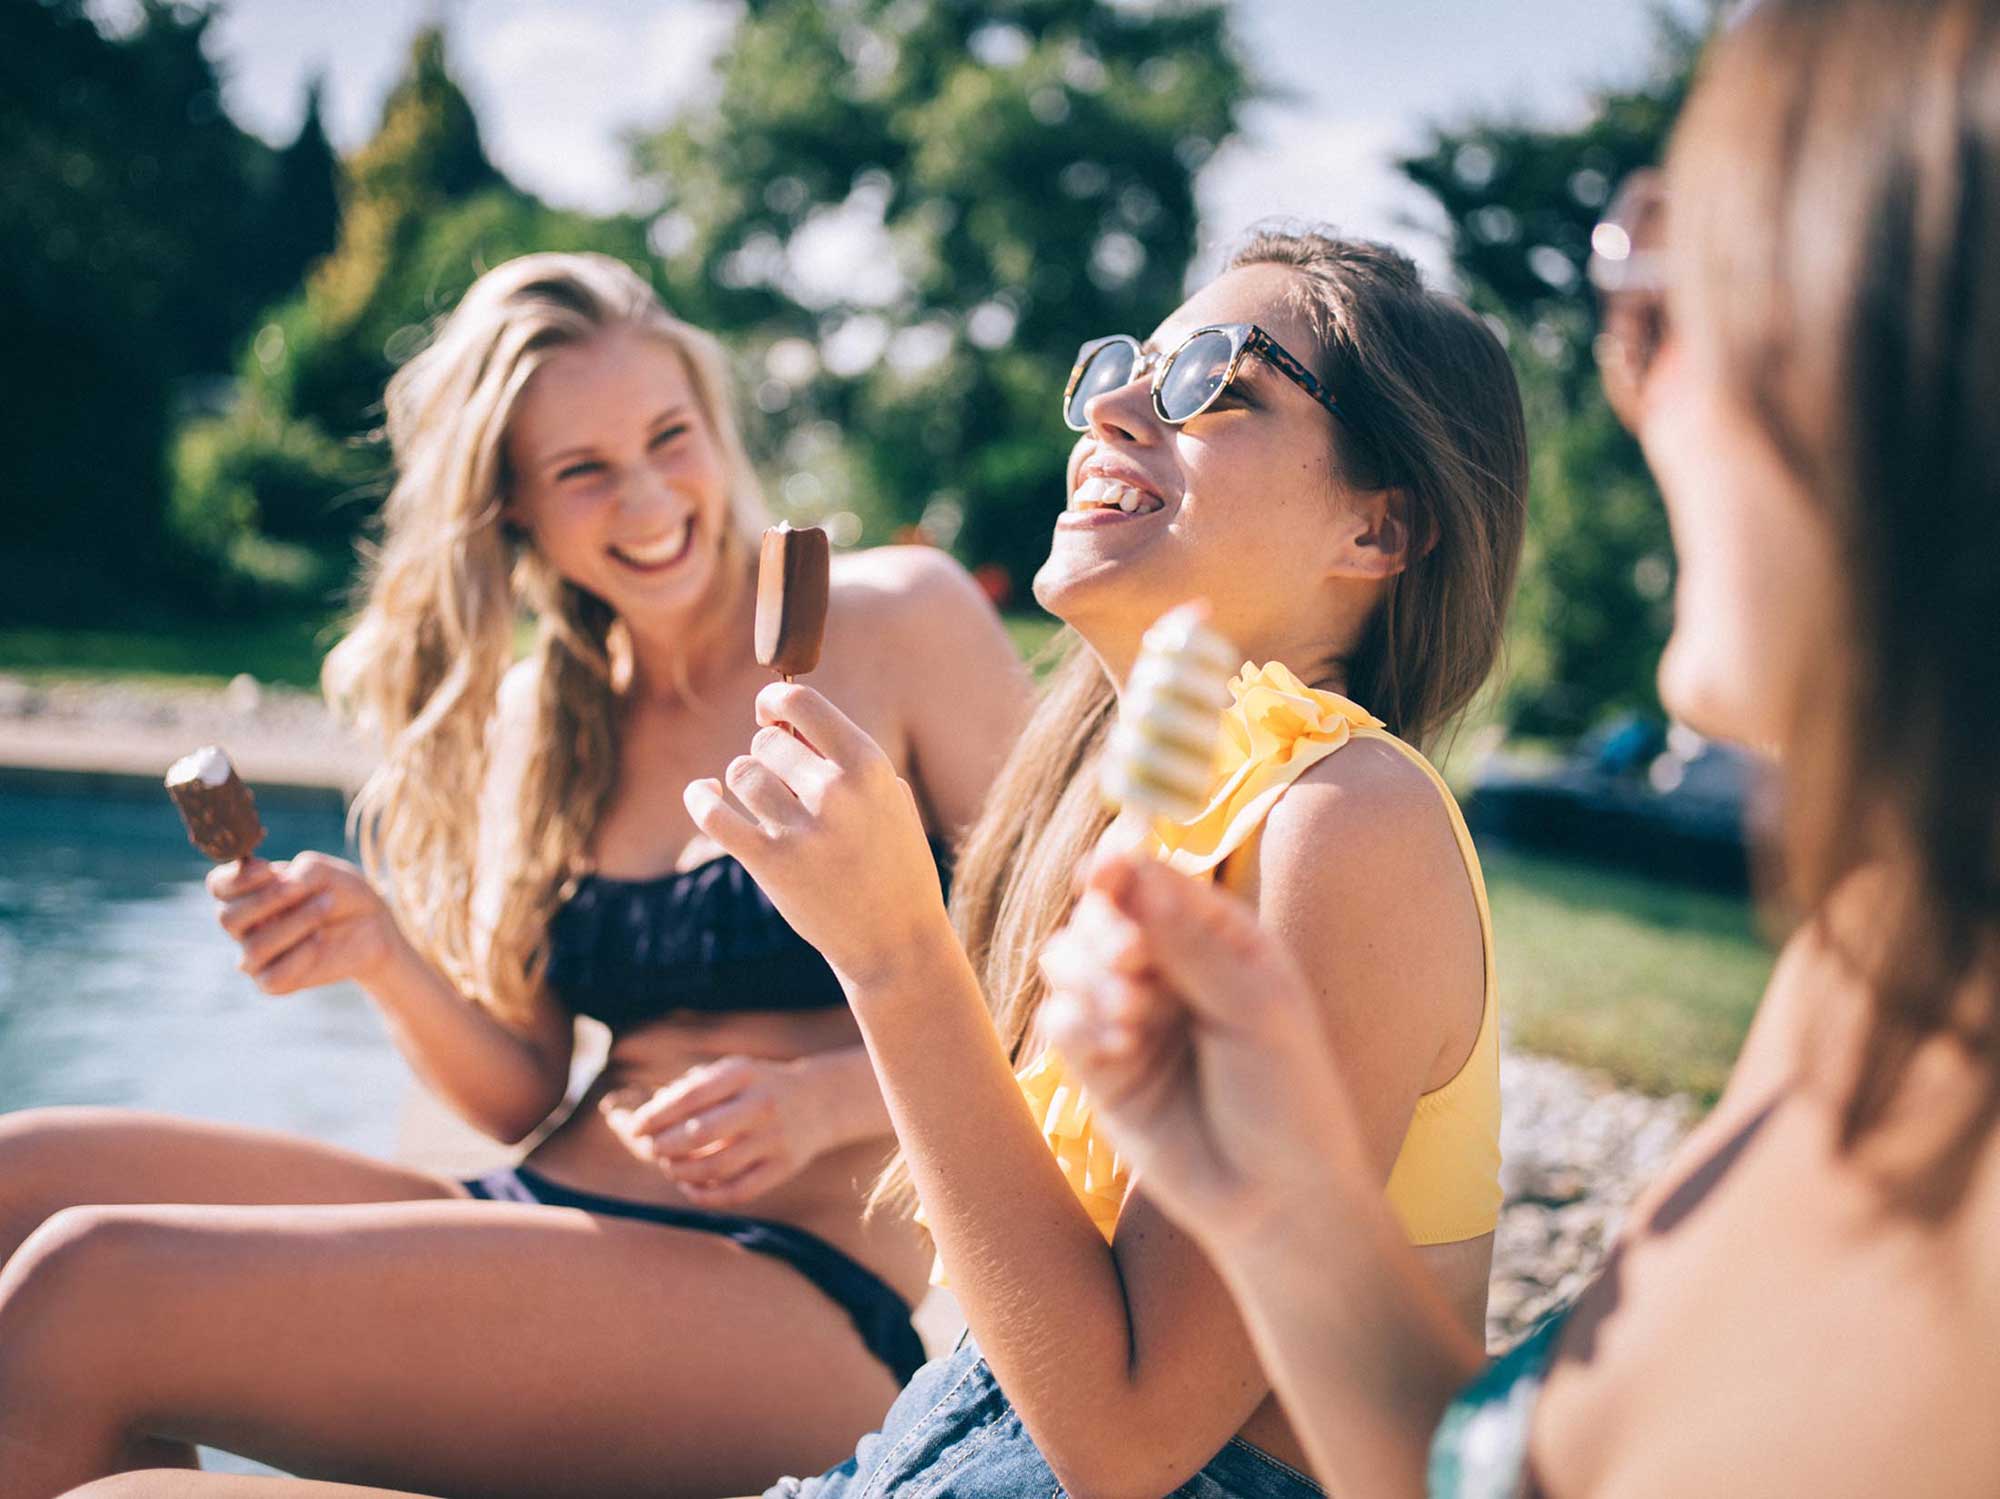 Women eating ice cream and laughing by the pool